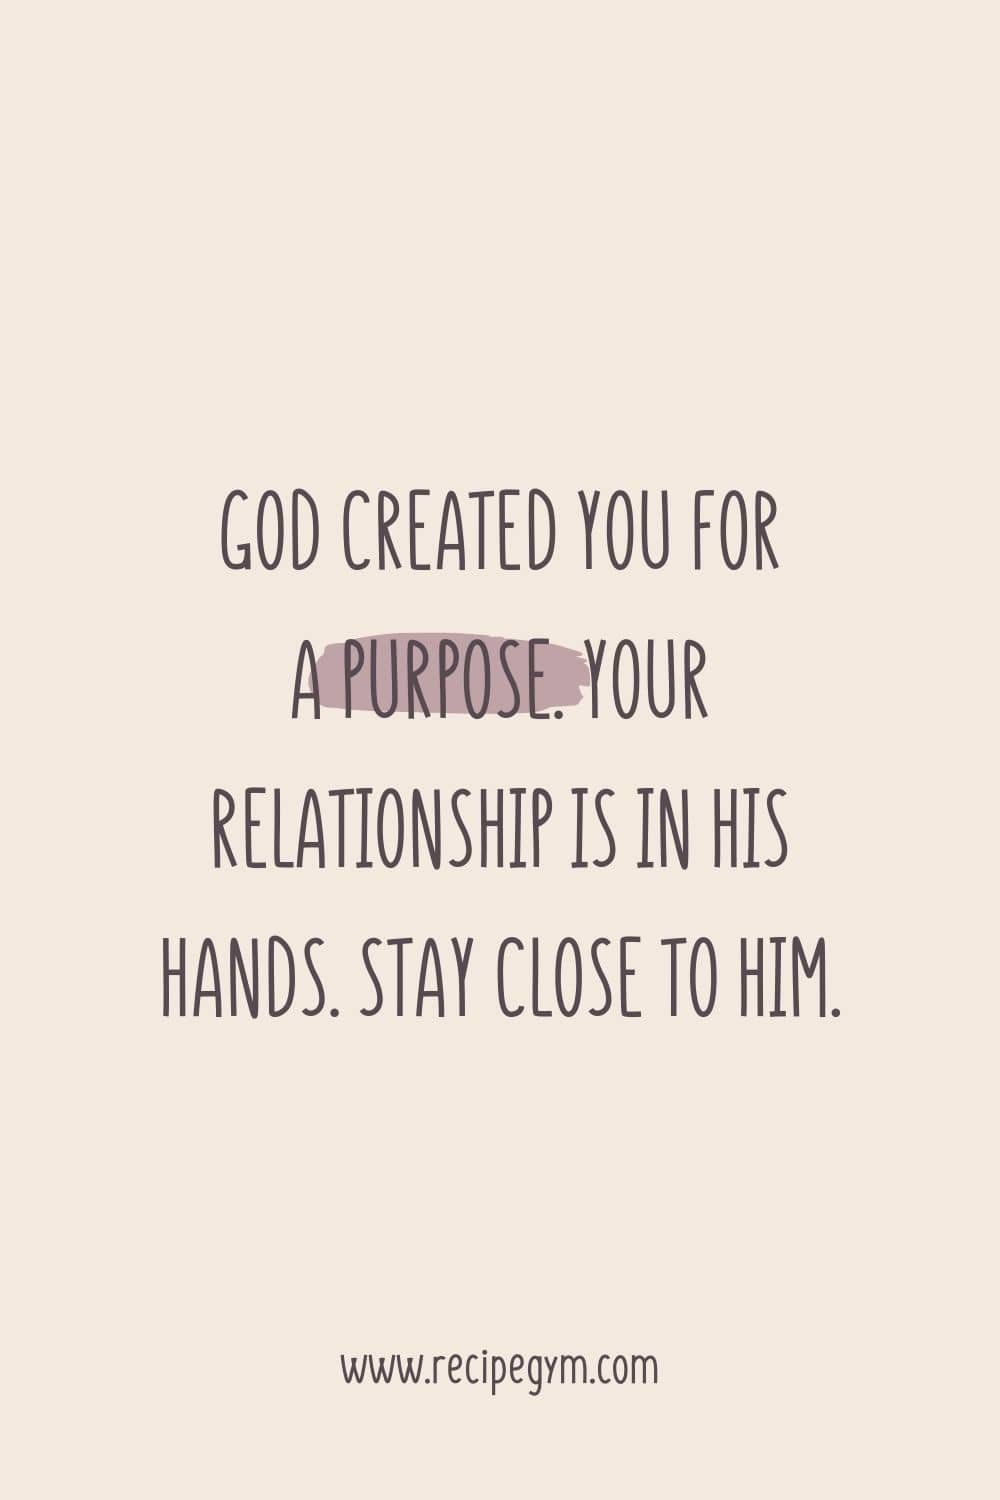 3T God created you for a purpose. Your relationship is in His hands. Stay close to Him